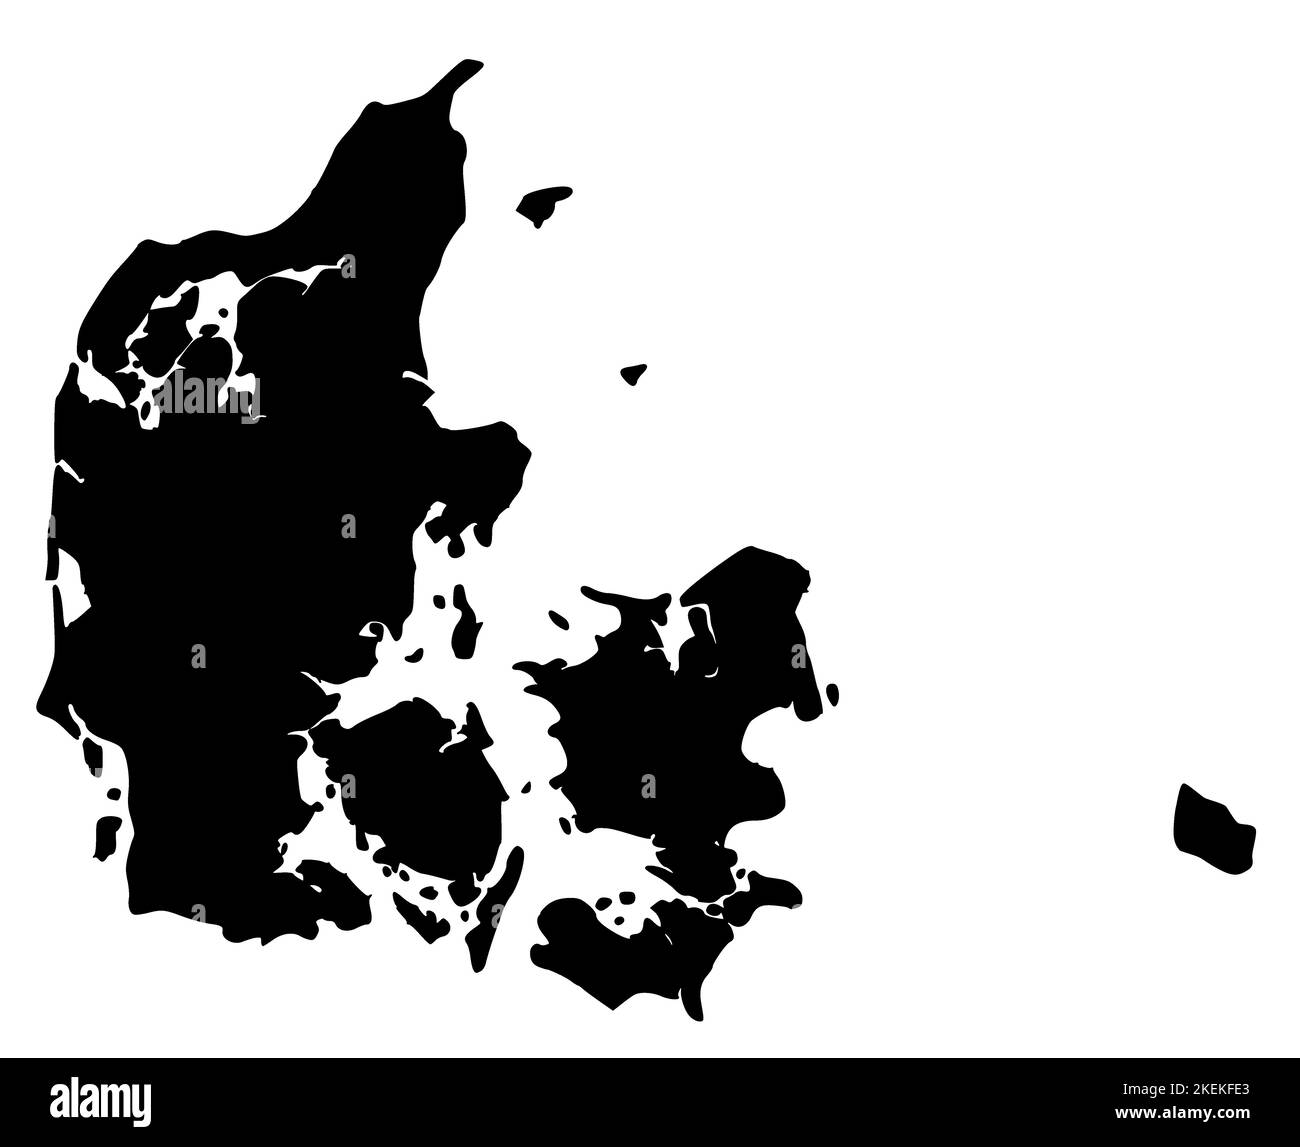 Map of Denmark filled with black color Stock Photo